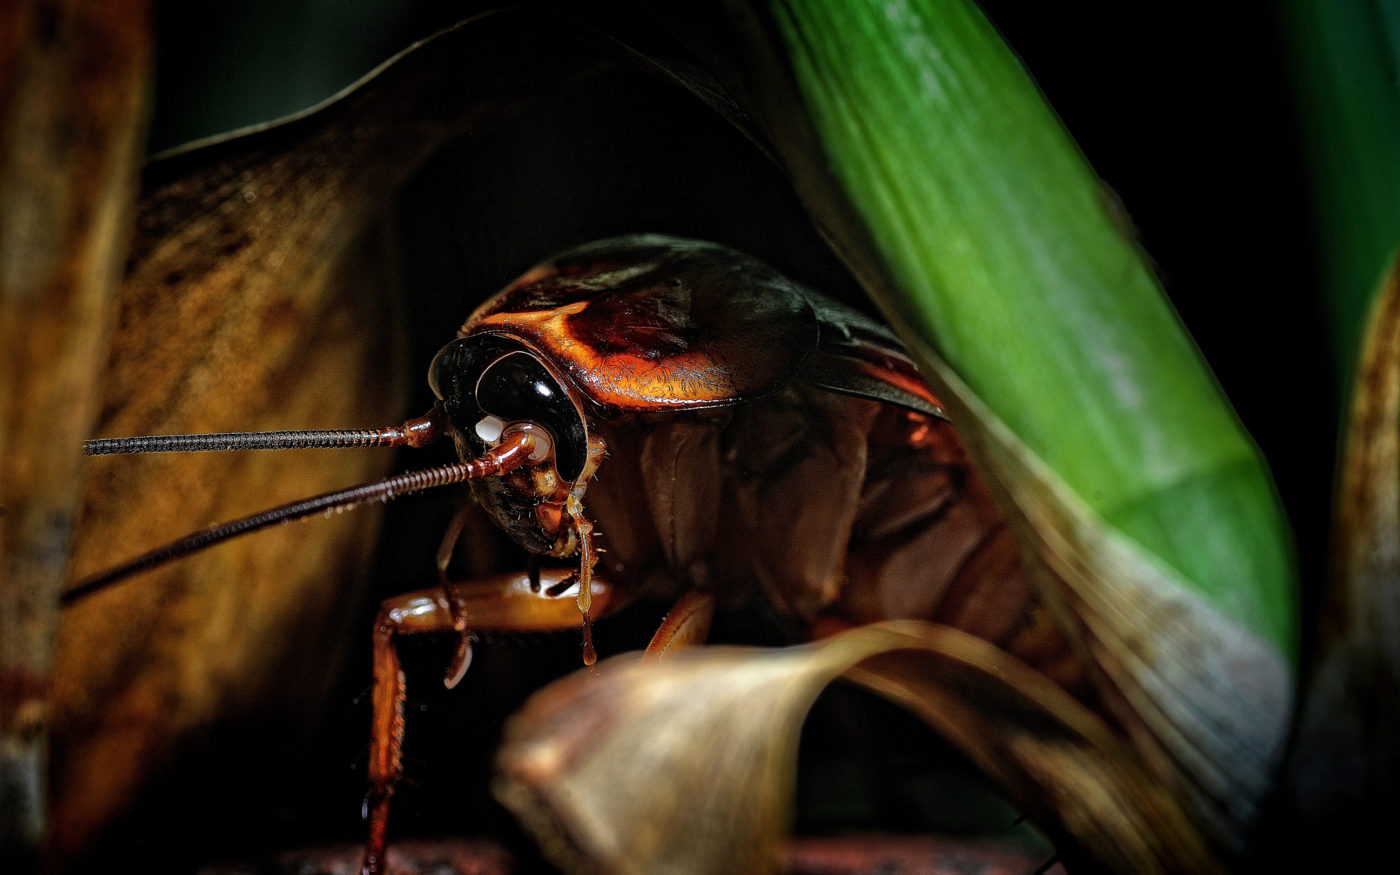 A lone cockroach hiding between plant stalks in the photographer’s garden. Jose Ramos located the cockroach by torchlight (flashlight) when he was looking for insects to photograph in his garden at night.